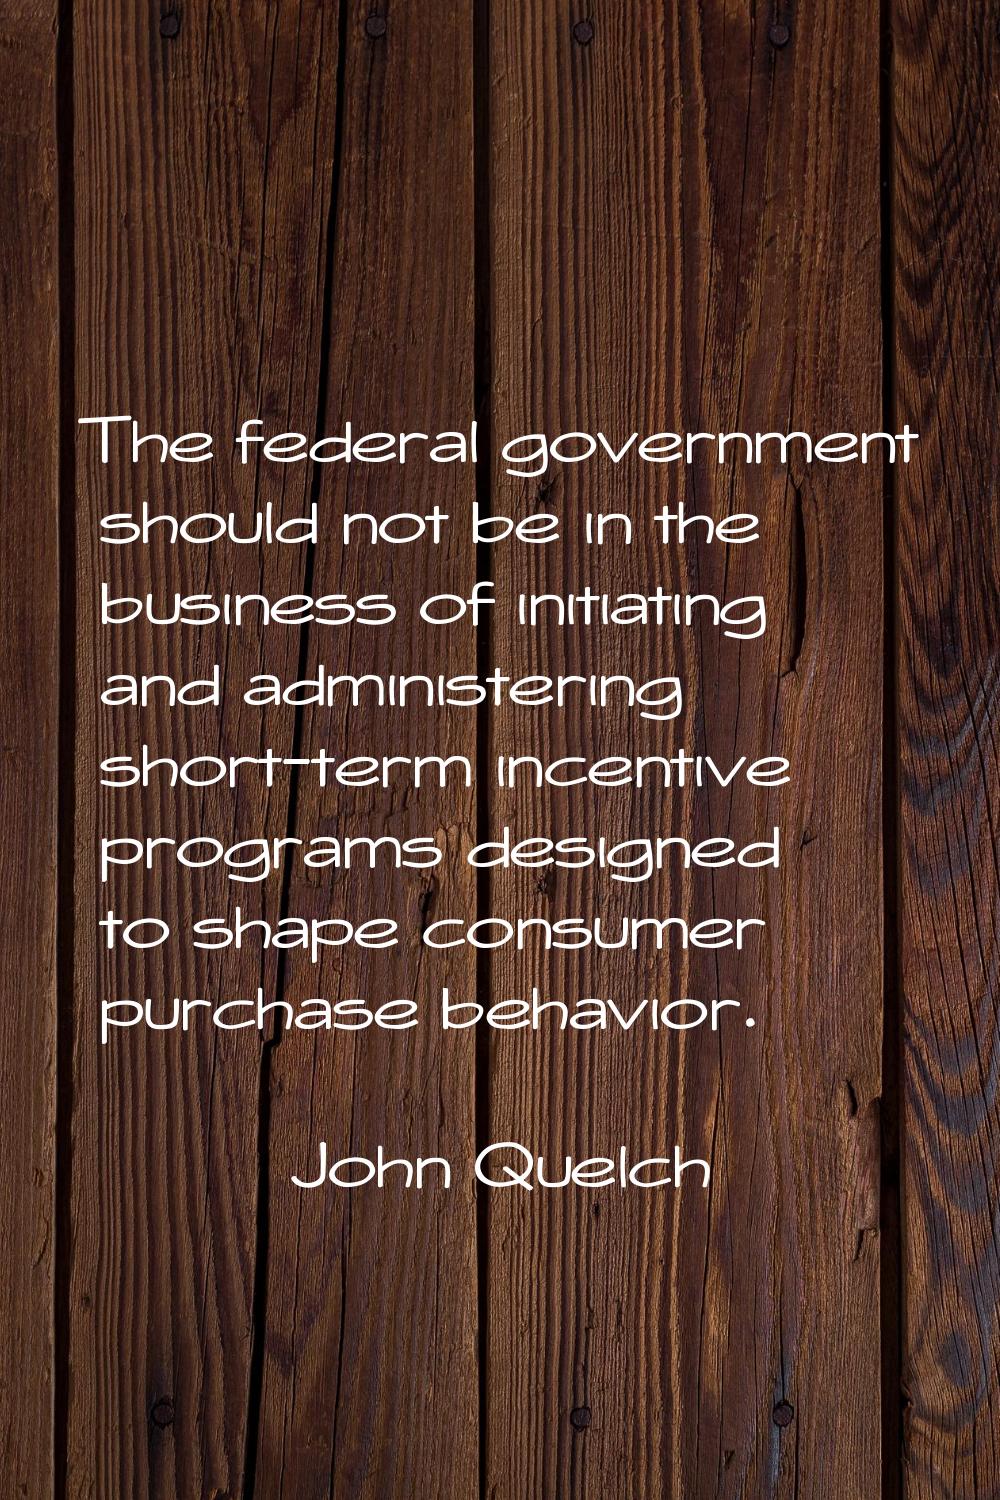 The federal government should not be in the business of initiating and administering short-term inc